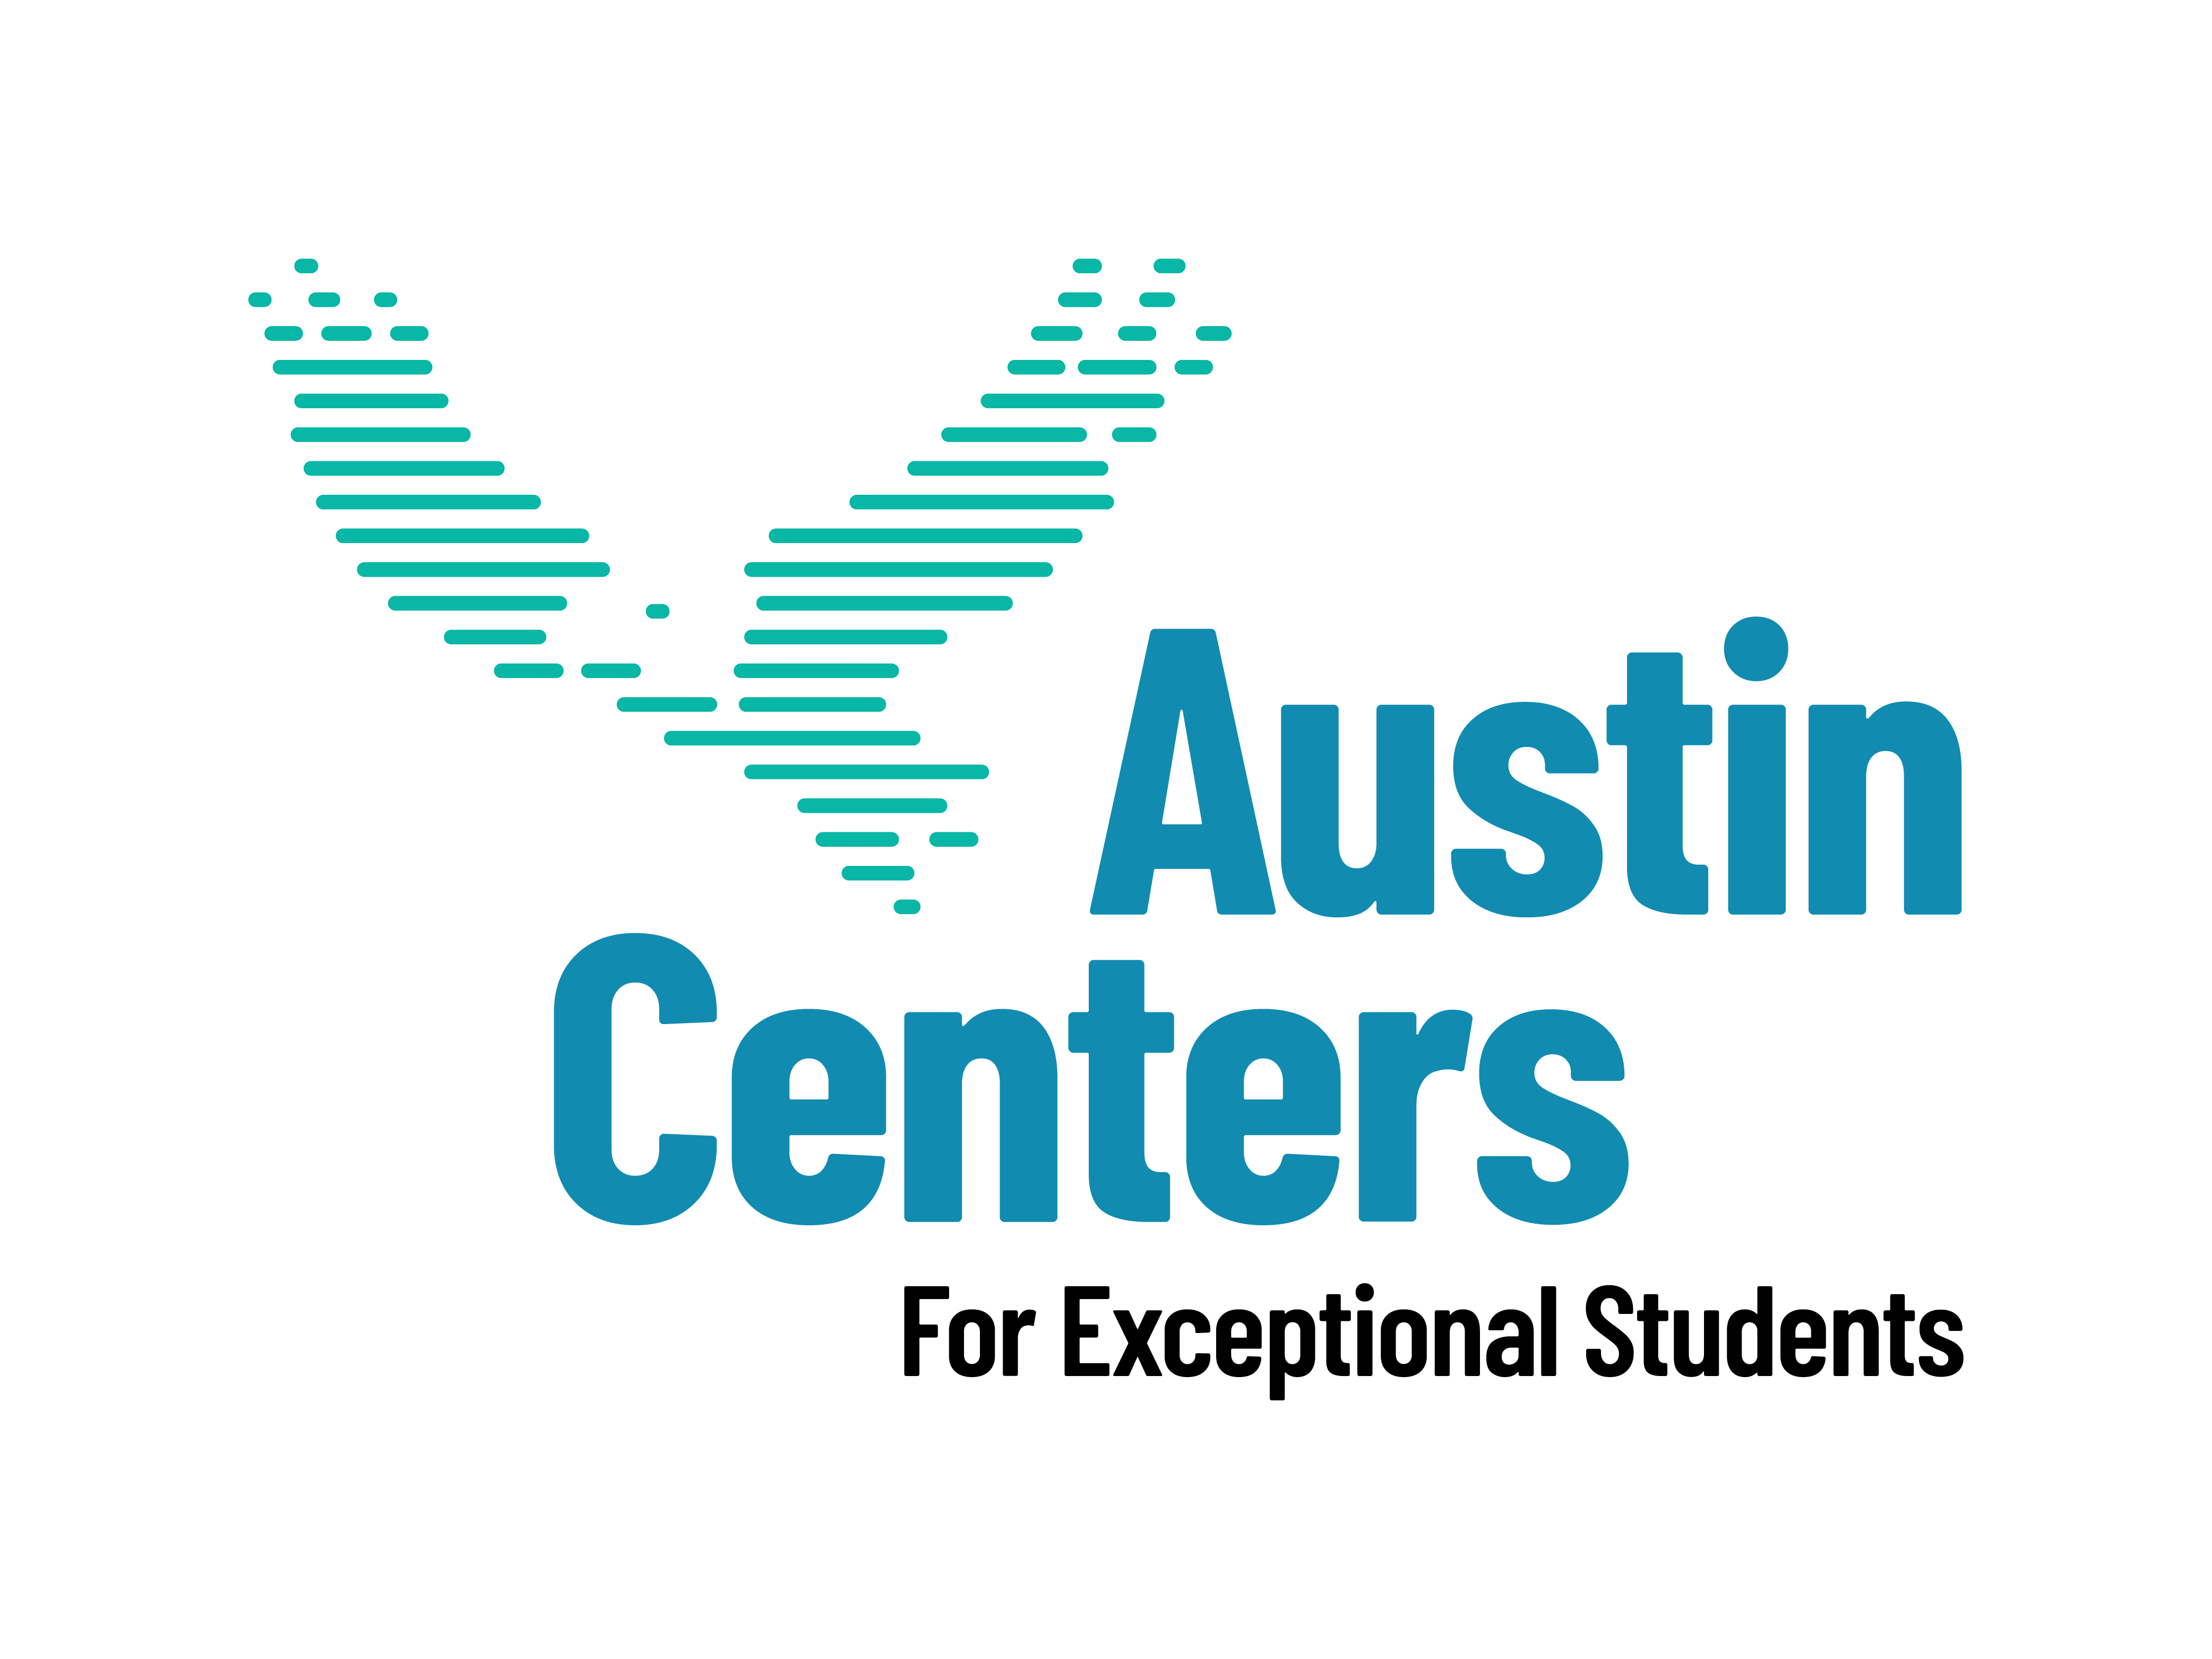 The Austin Centers for Students logo